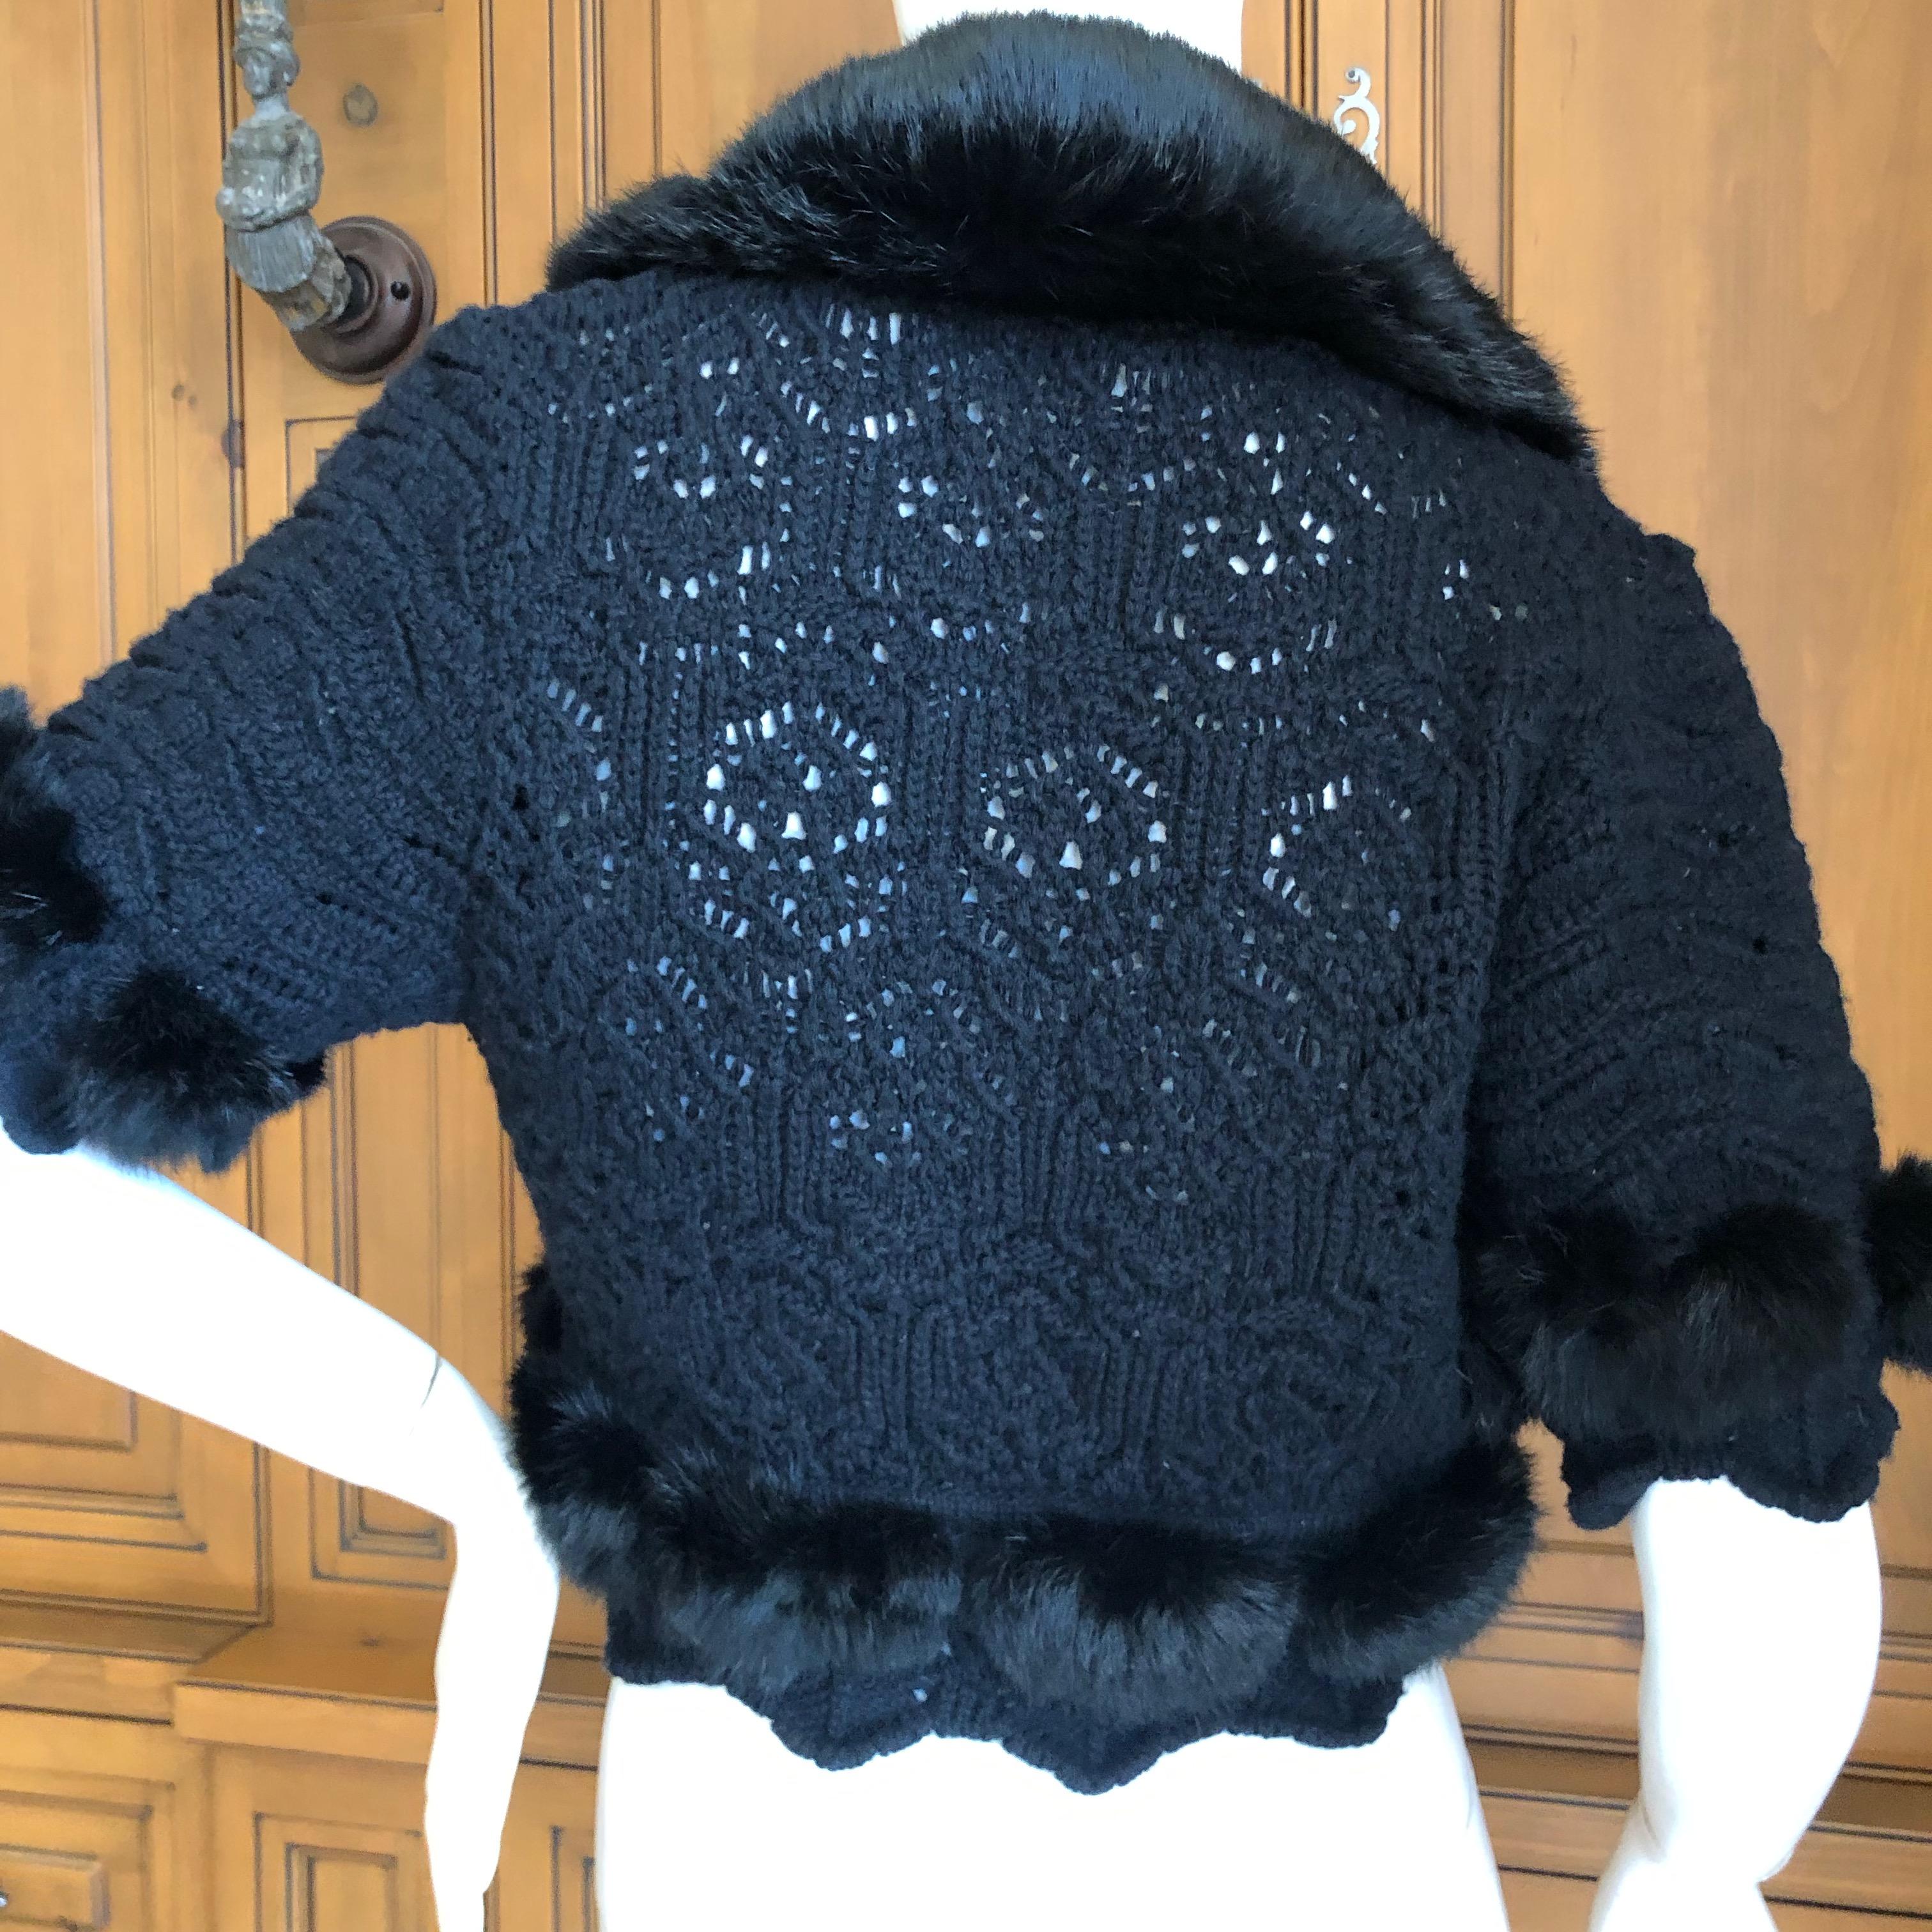  Christian Dior by John Galliano Fur Trimmed Open Weave Knit Black Sweater  In Excellent Condition For Sale In Cloverdale, CA